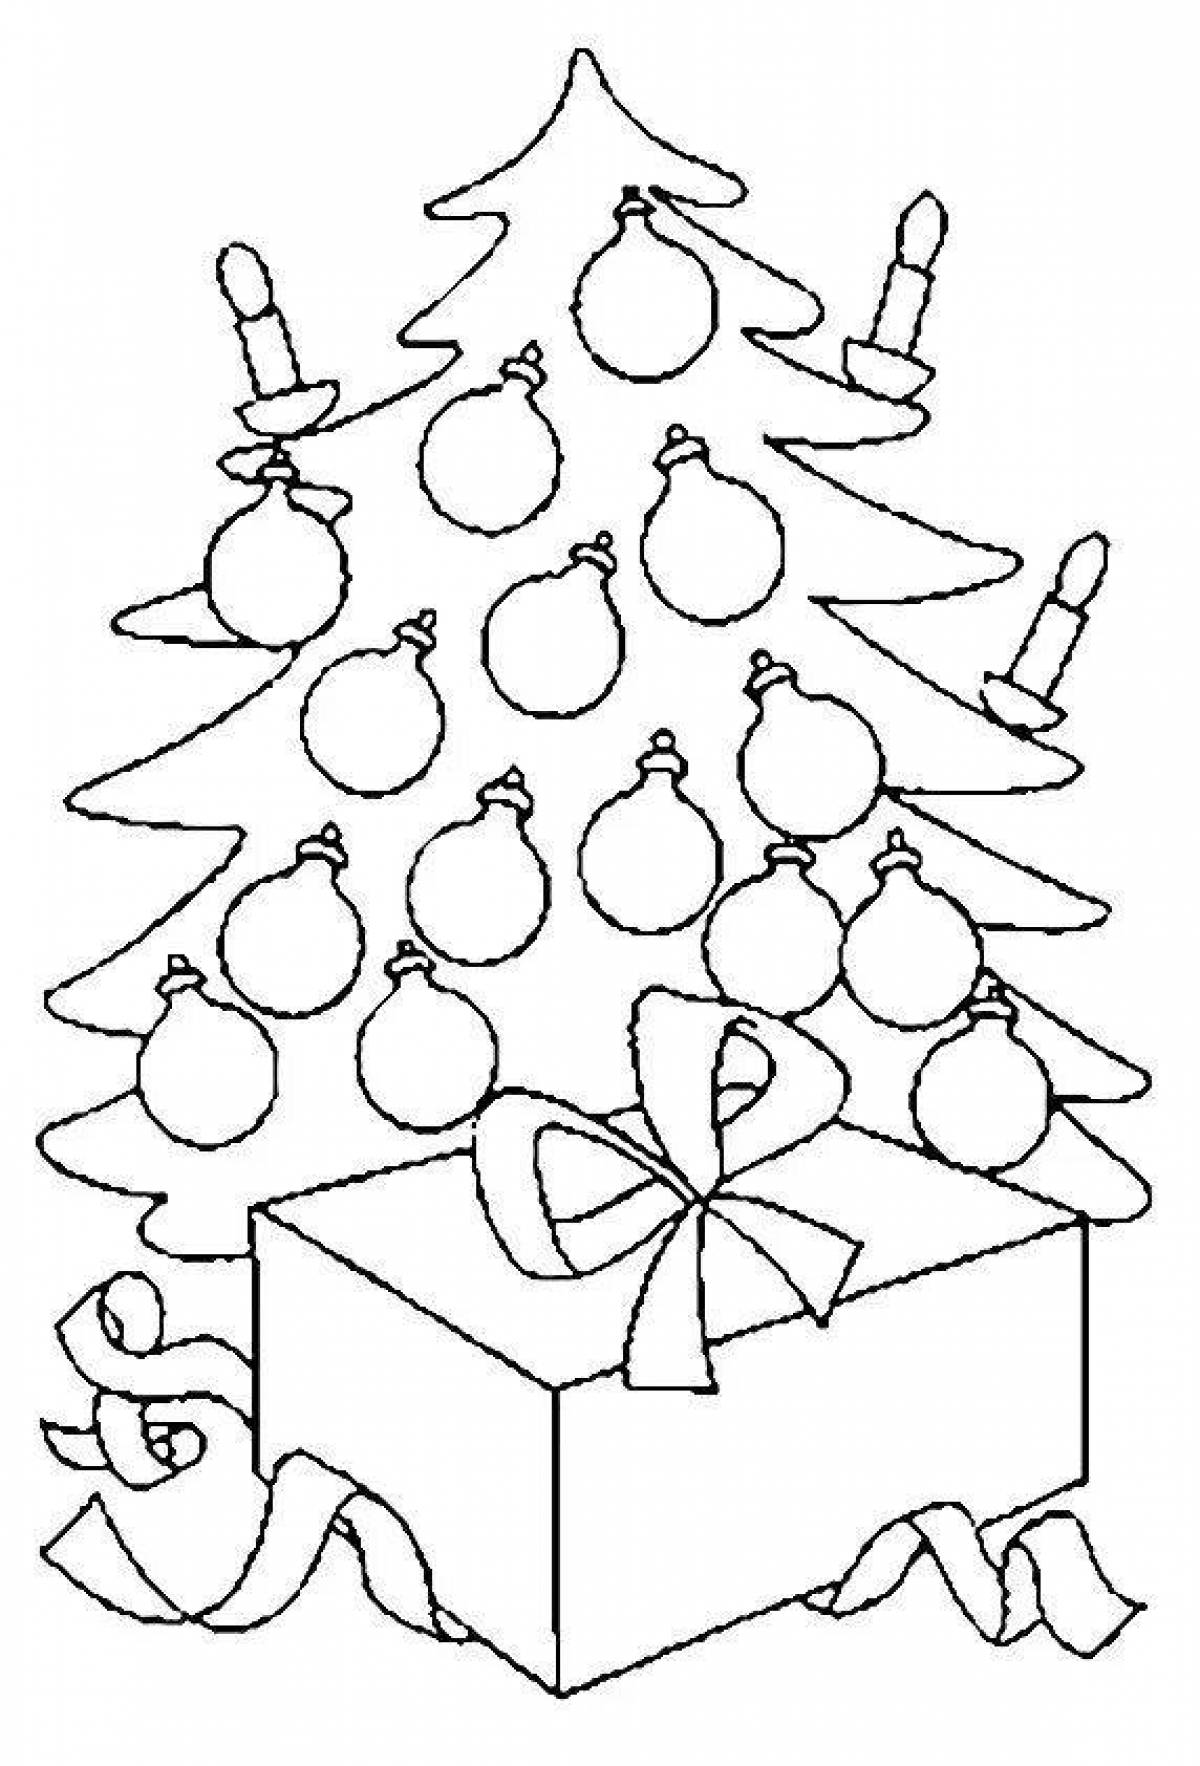 Coloring Christmas tree with balls